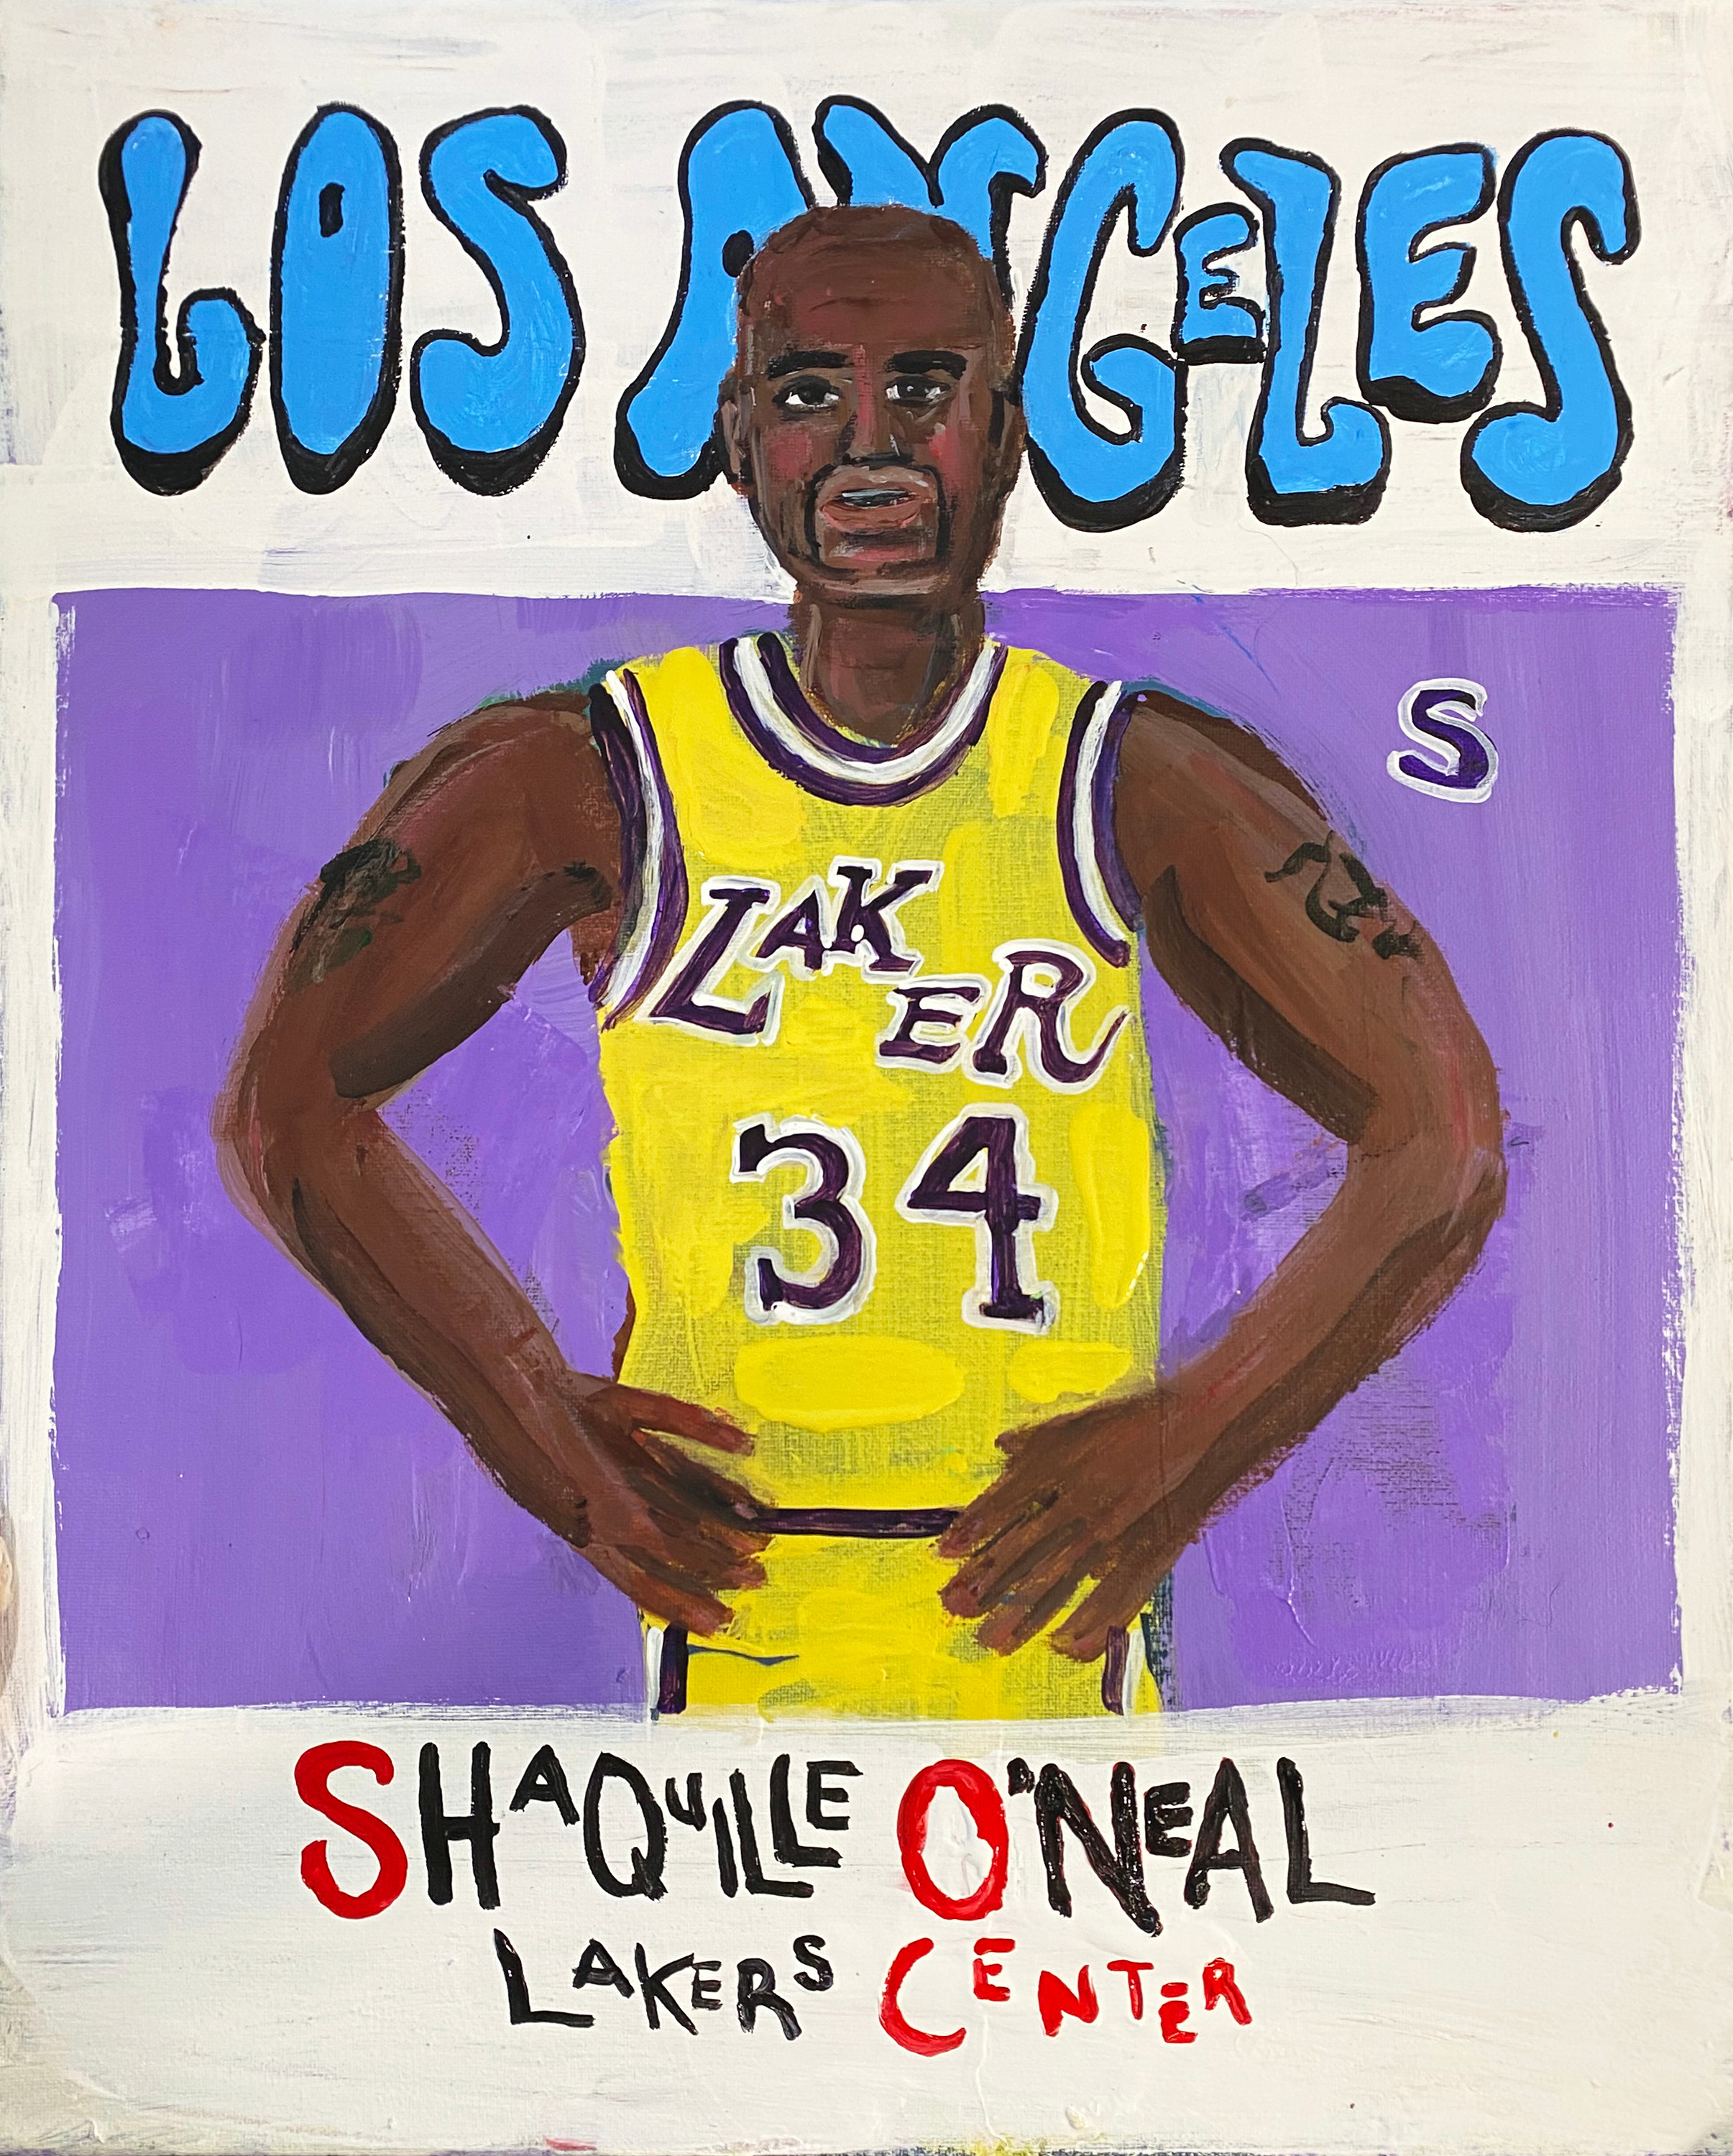 Shaquille oneal 2 bynmit